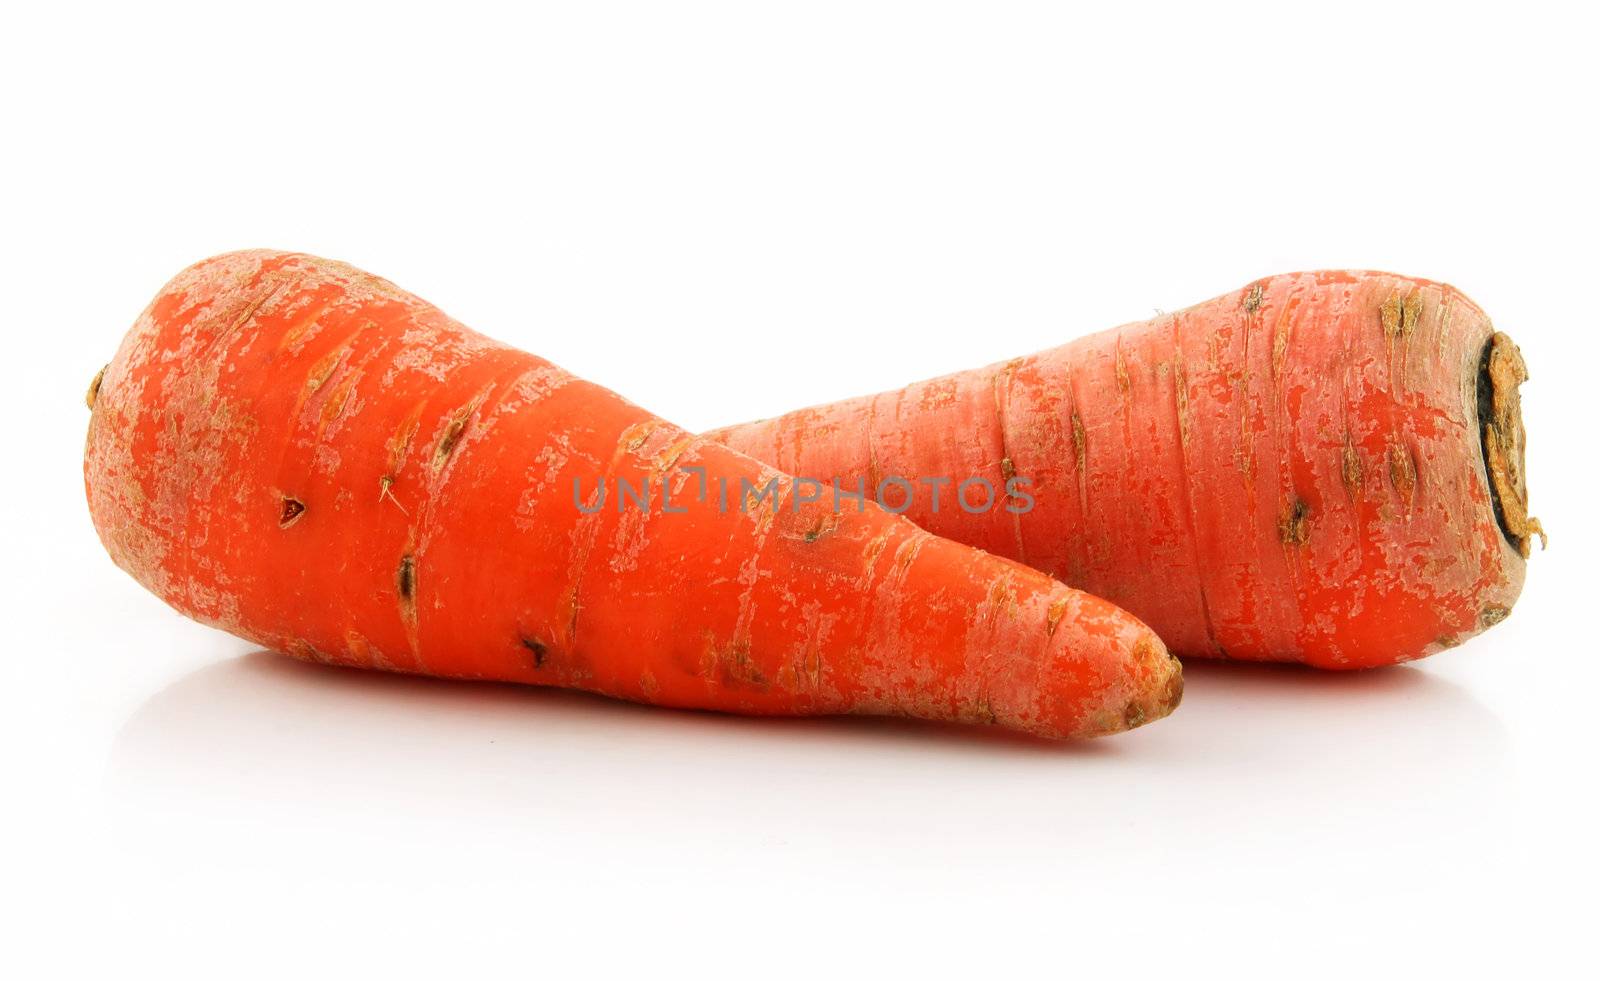 Ripe Carrot Isolated on White Background